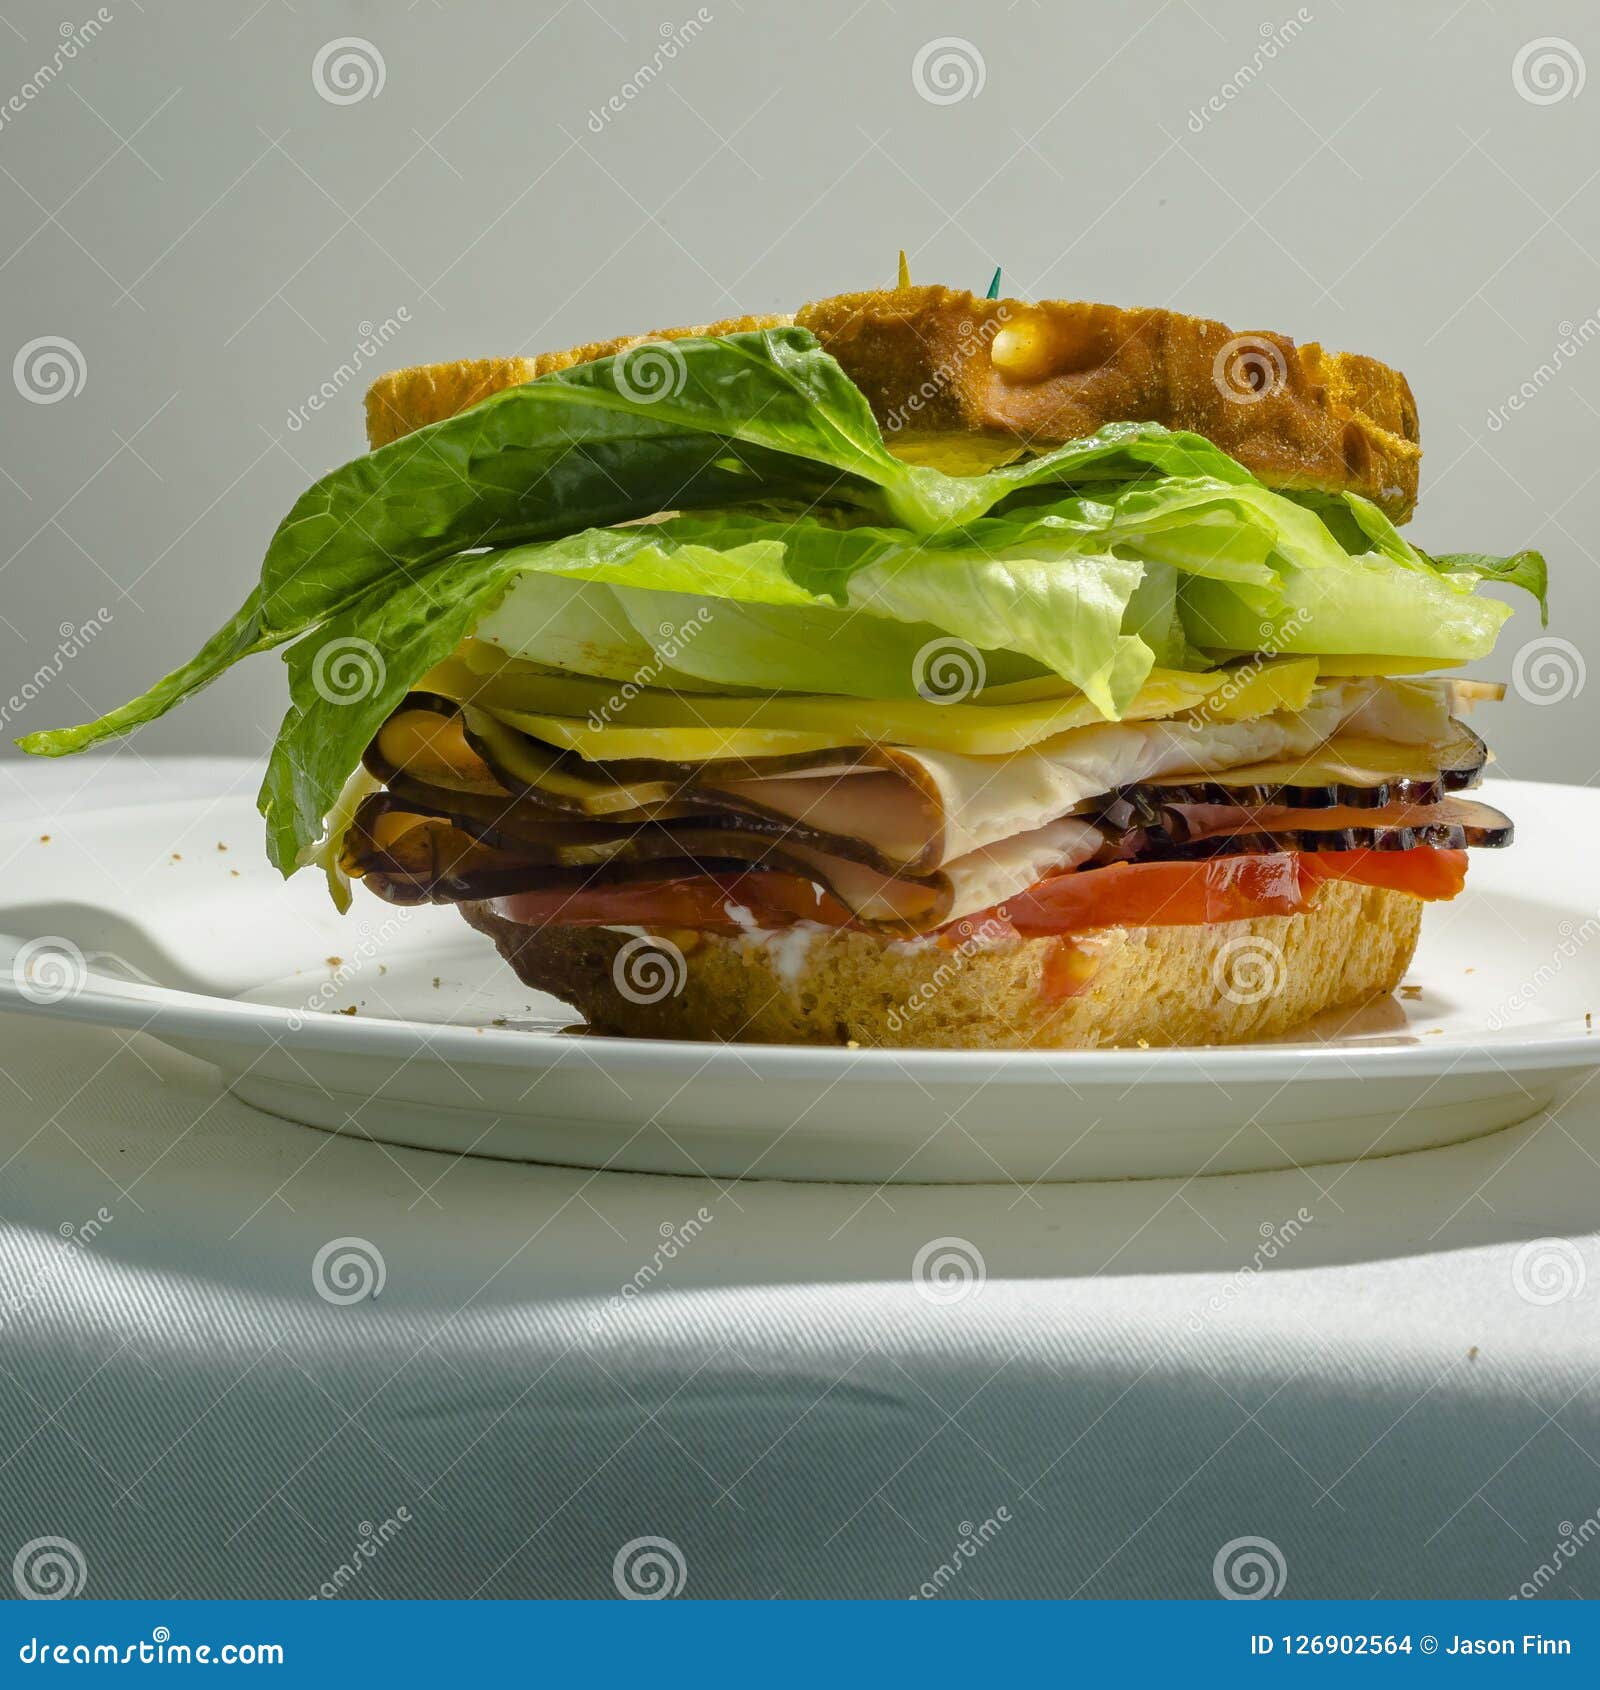 Close Up Of Deli Sandwich With Appetizing Filling Stock Photo Image